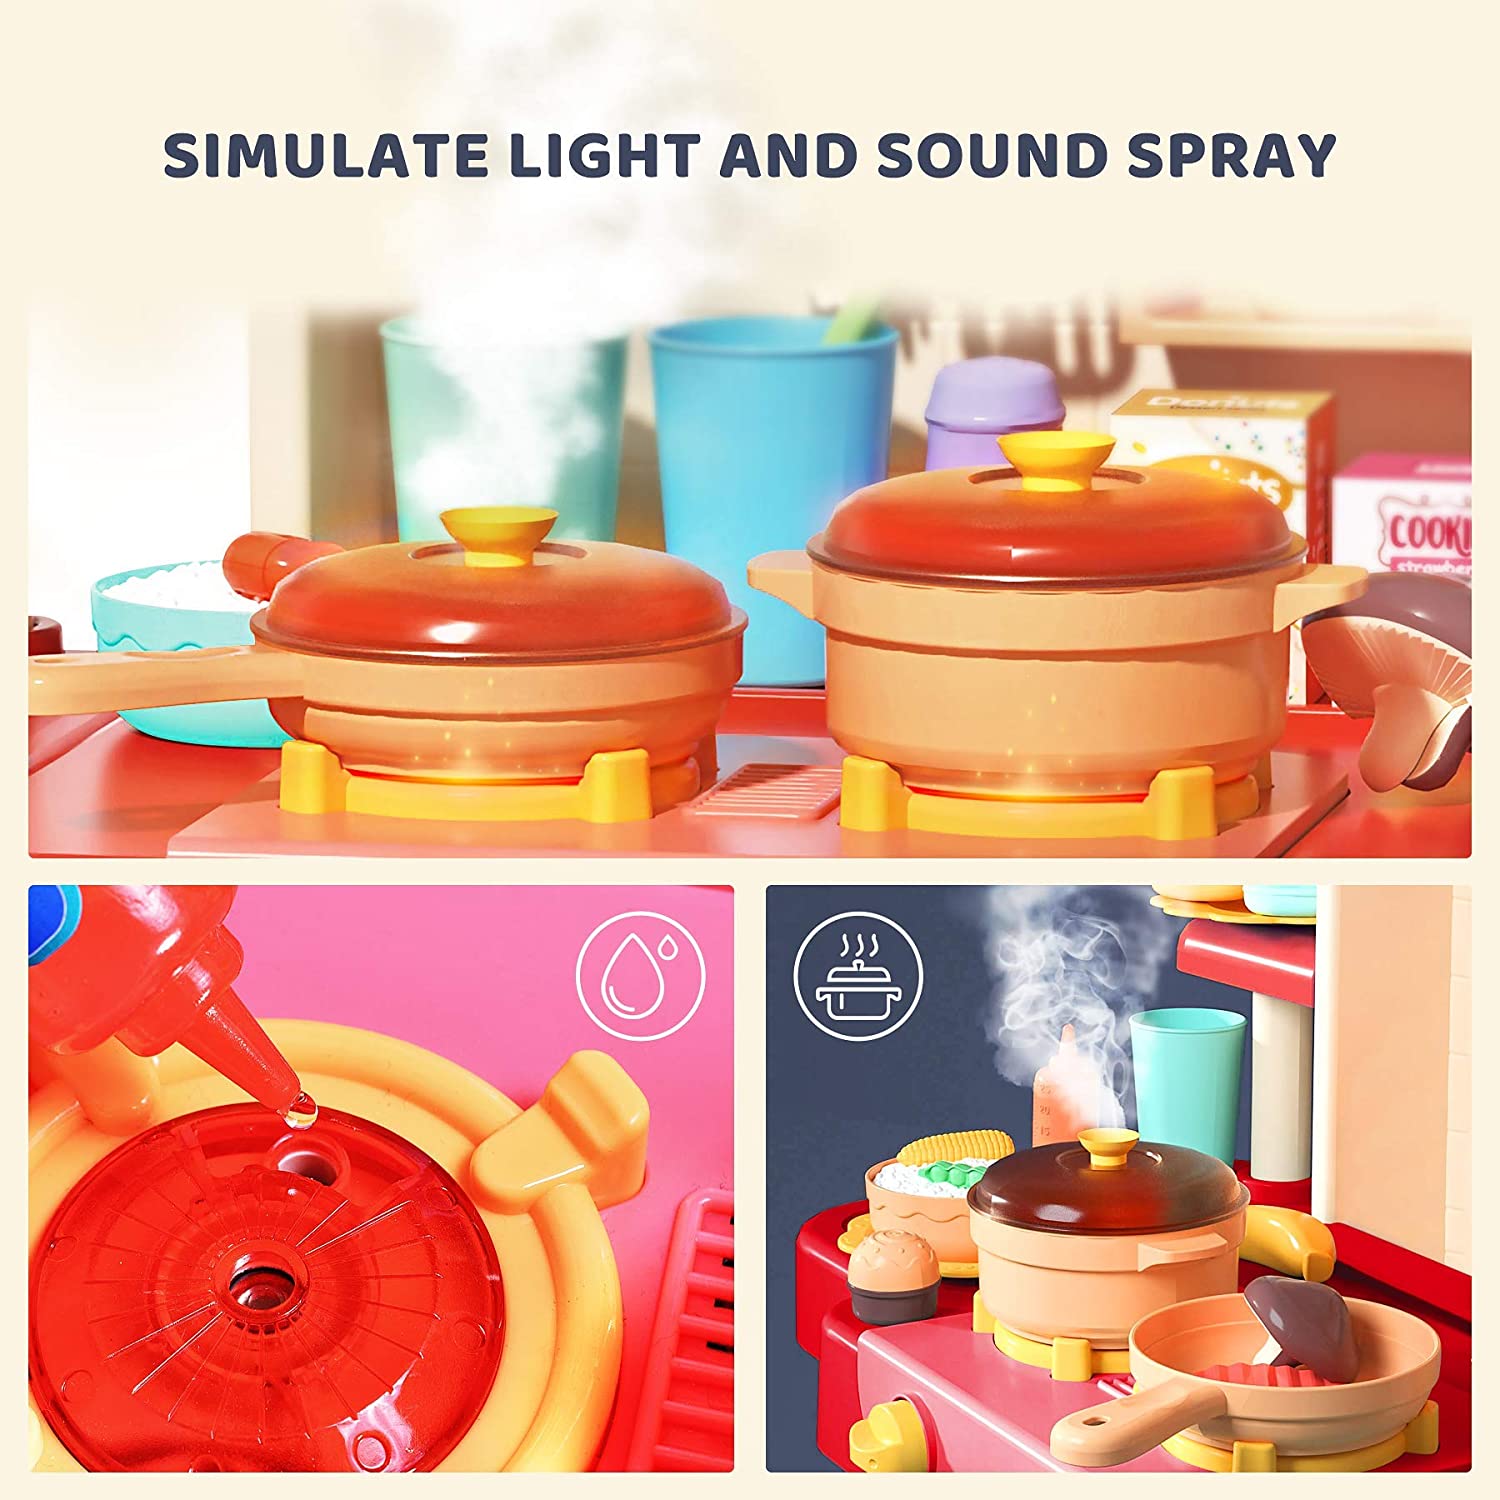 JOYOOSS Kitchen Toy for Kids with 134pcs Kitchen Playset Accessories, Pretend Steam Light & Sound Stove, Play Sink, Color Changing Play Food, Extra Birthday Cake and Egg Cooker for Toddlers